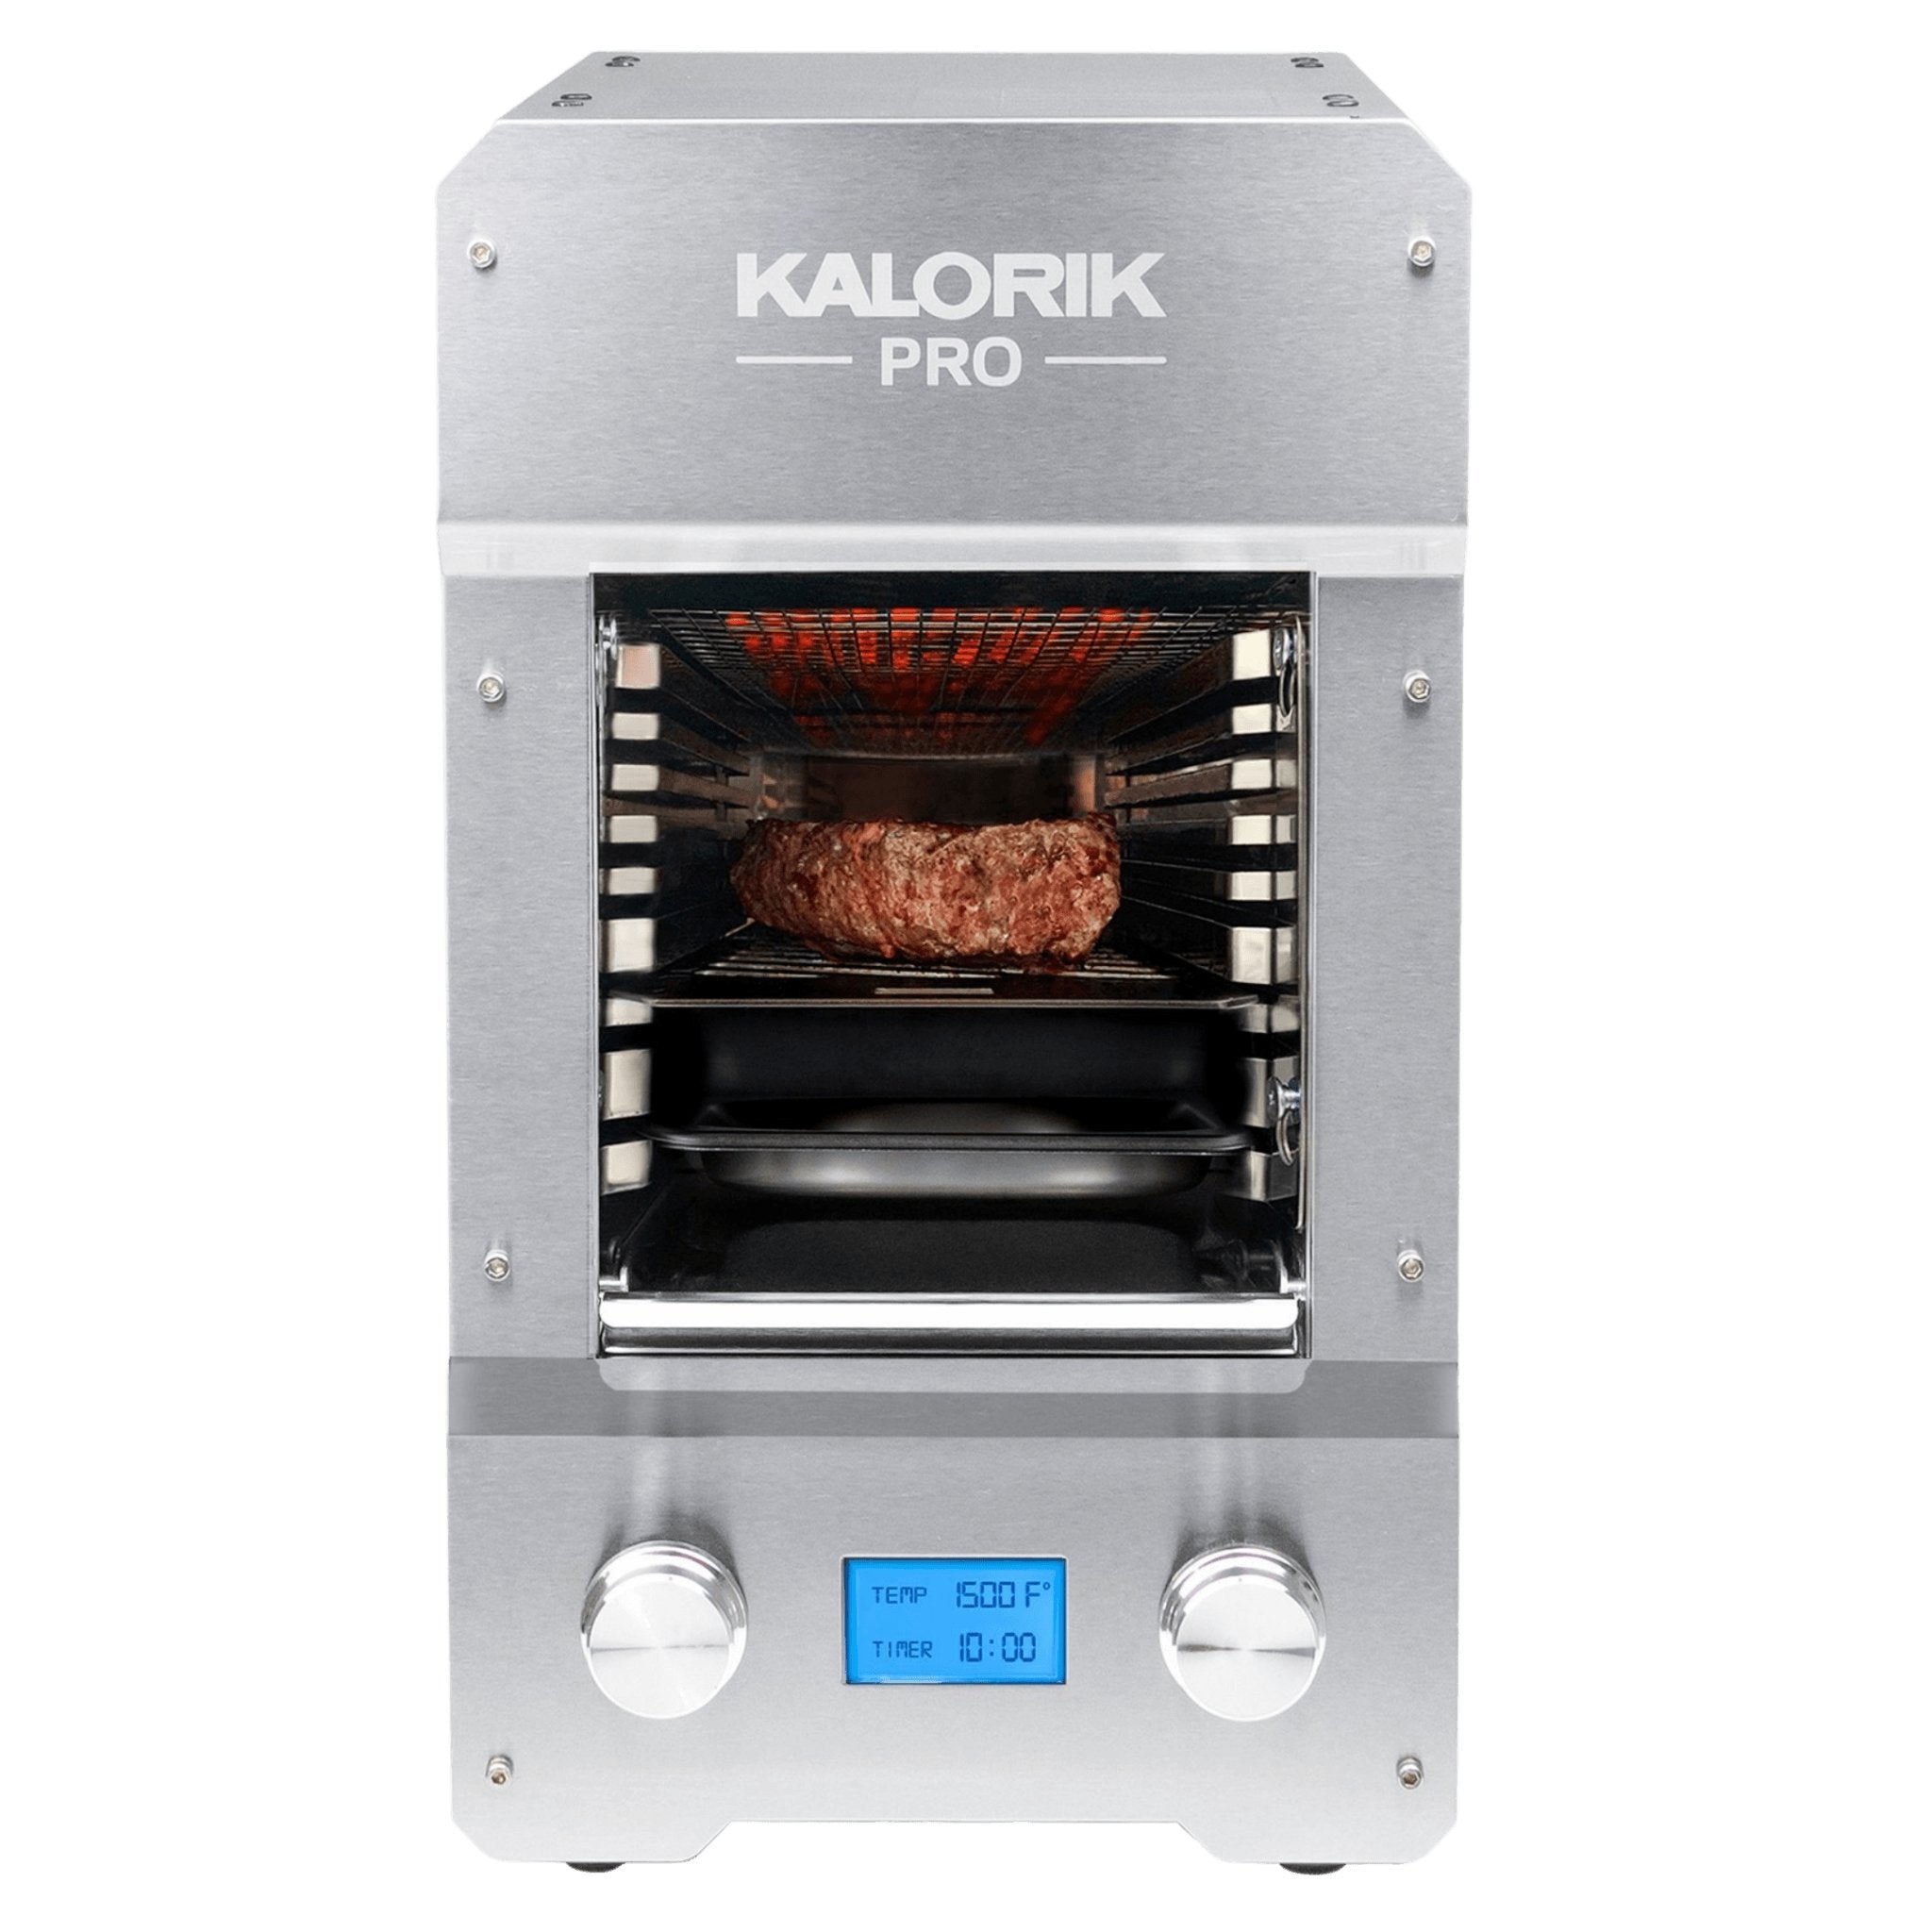 Kalorik Pro 1500 Electric Steakhouse Grill, Stainless Steel